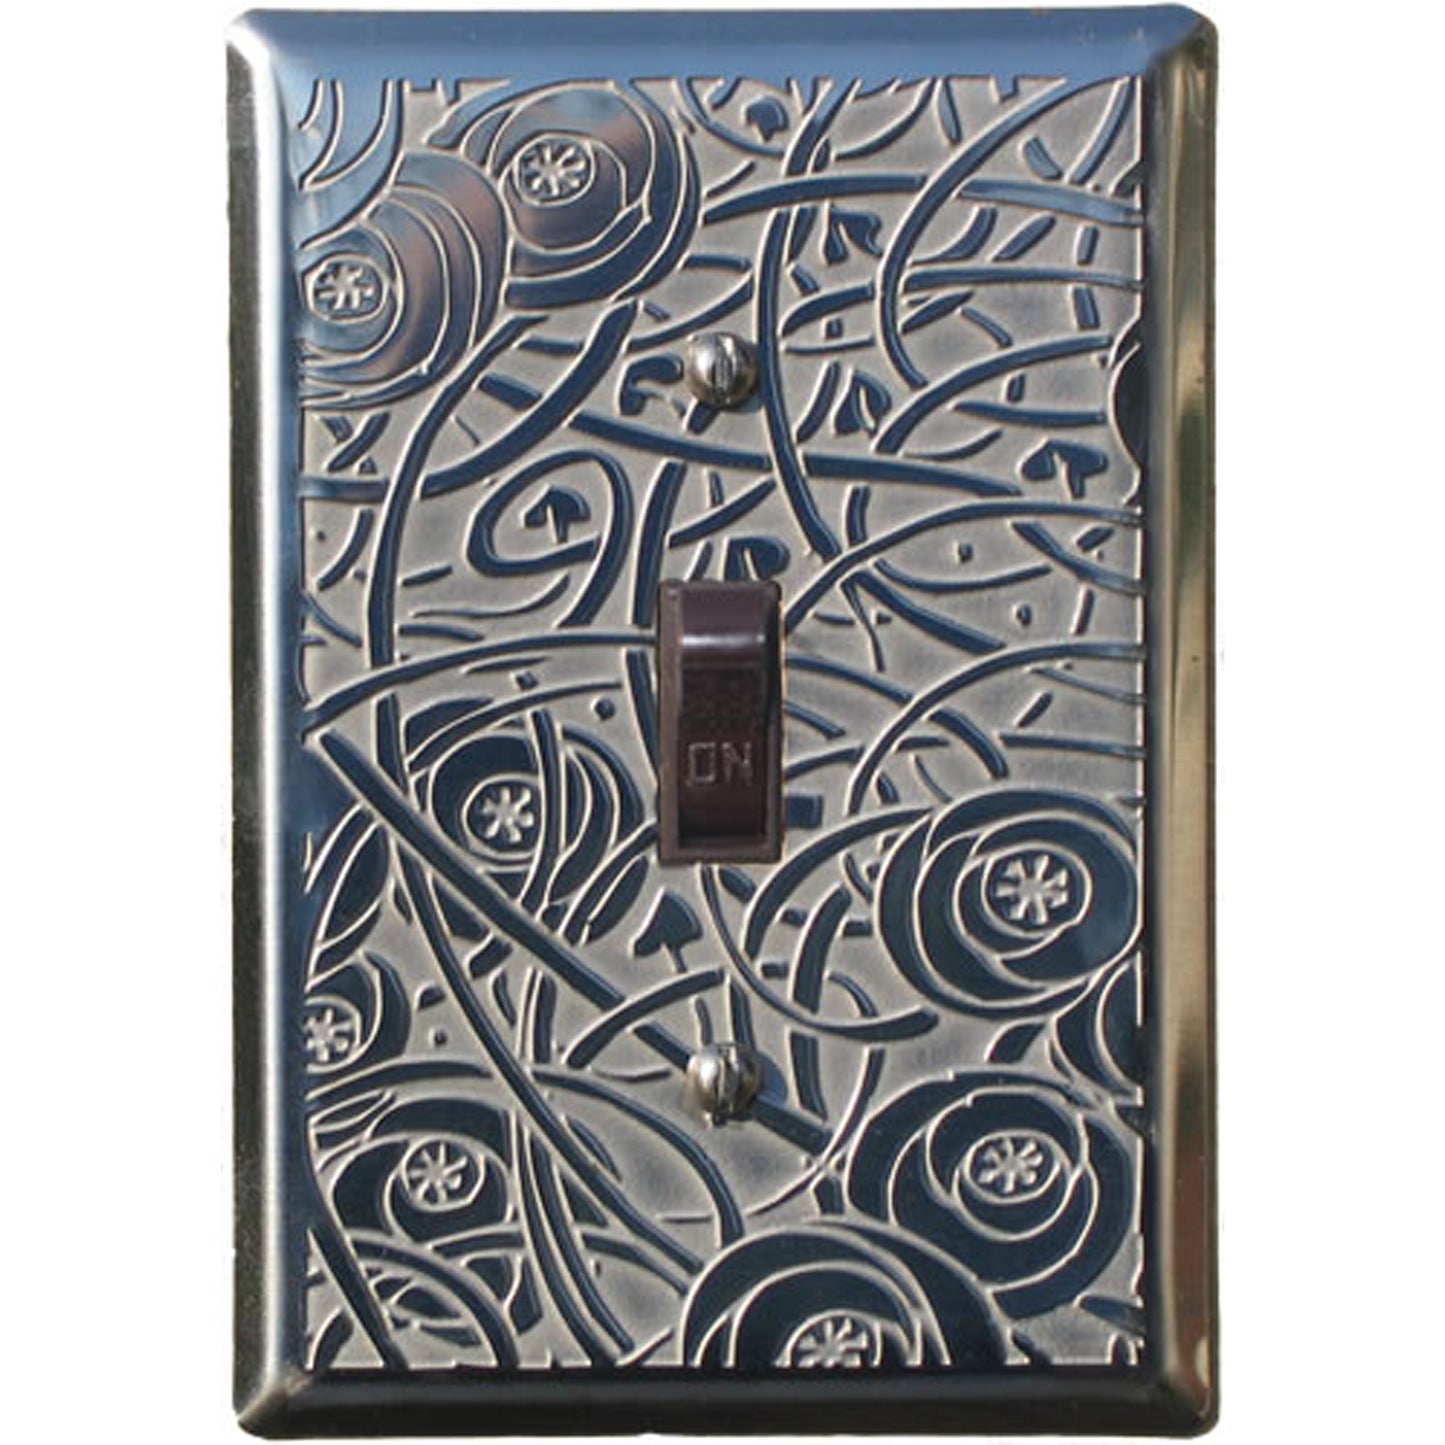 Deco Floral Stainless Steel Single Toggle Switchplate